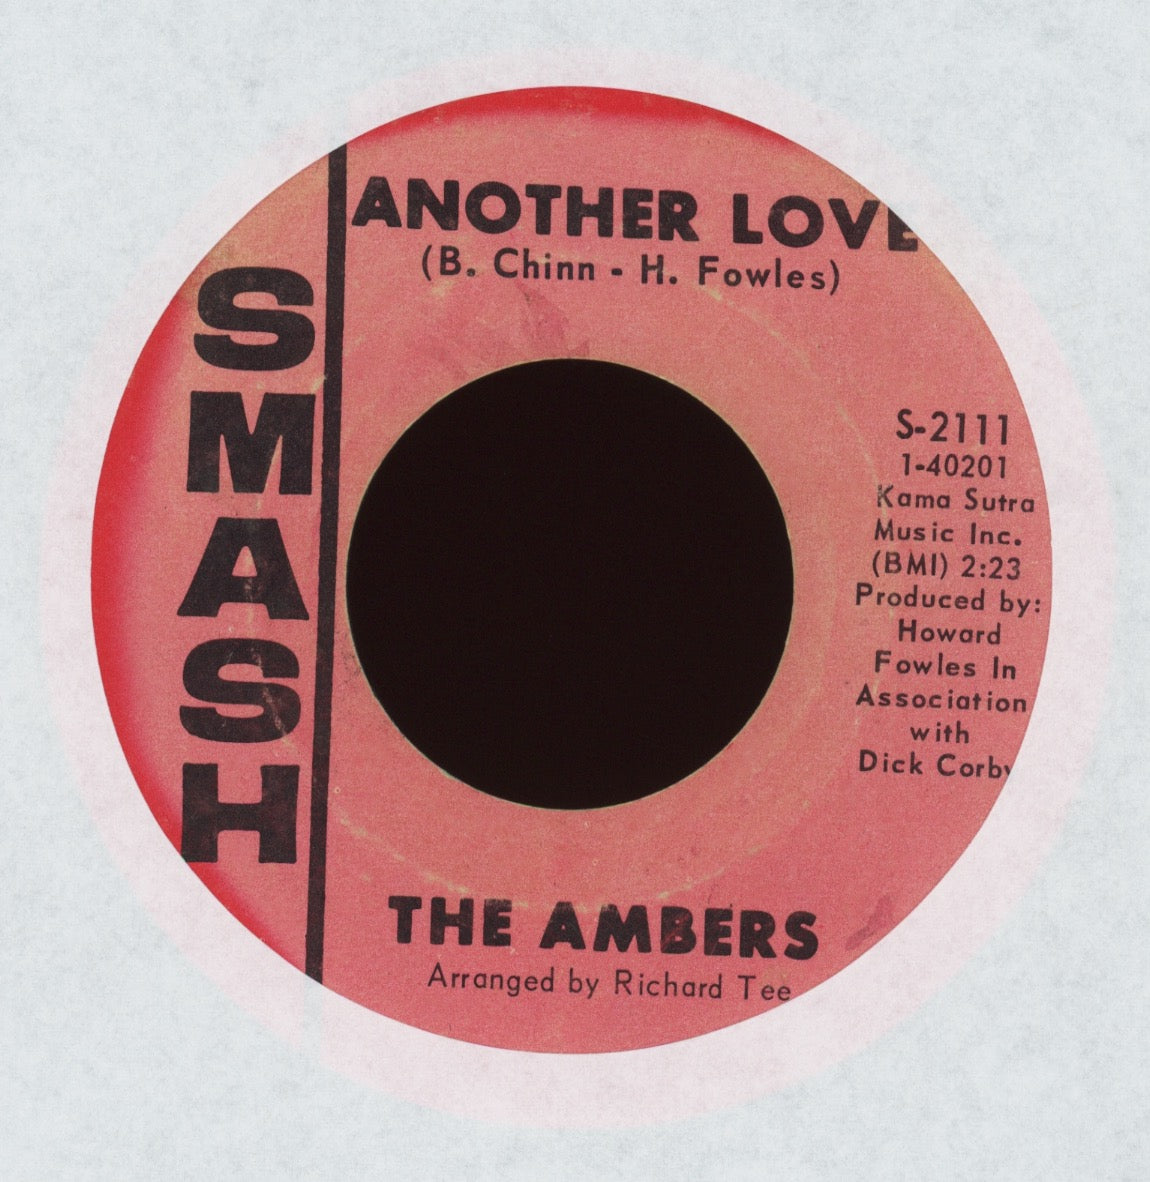 The Ambers - Potion Of Love on Smash Northern Soul 45